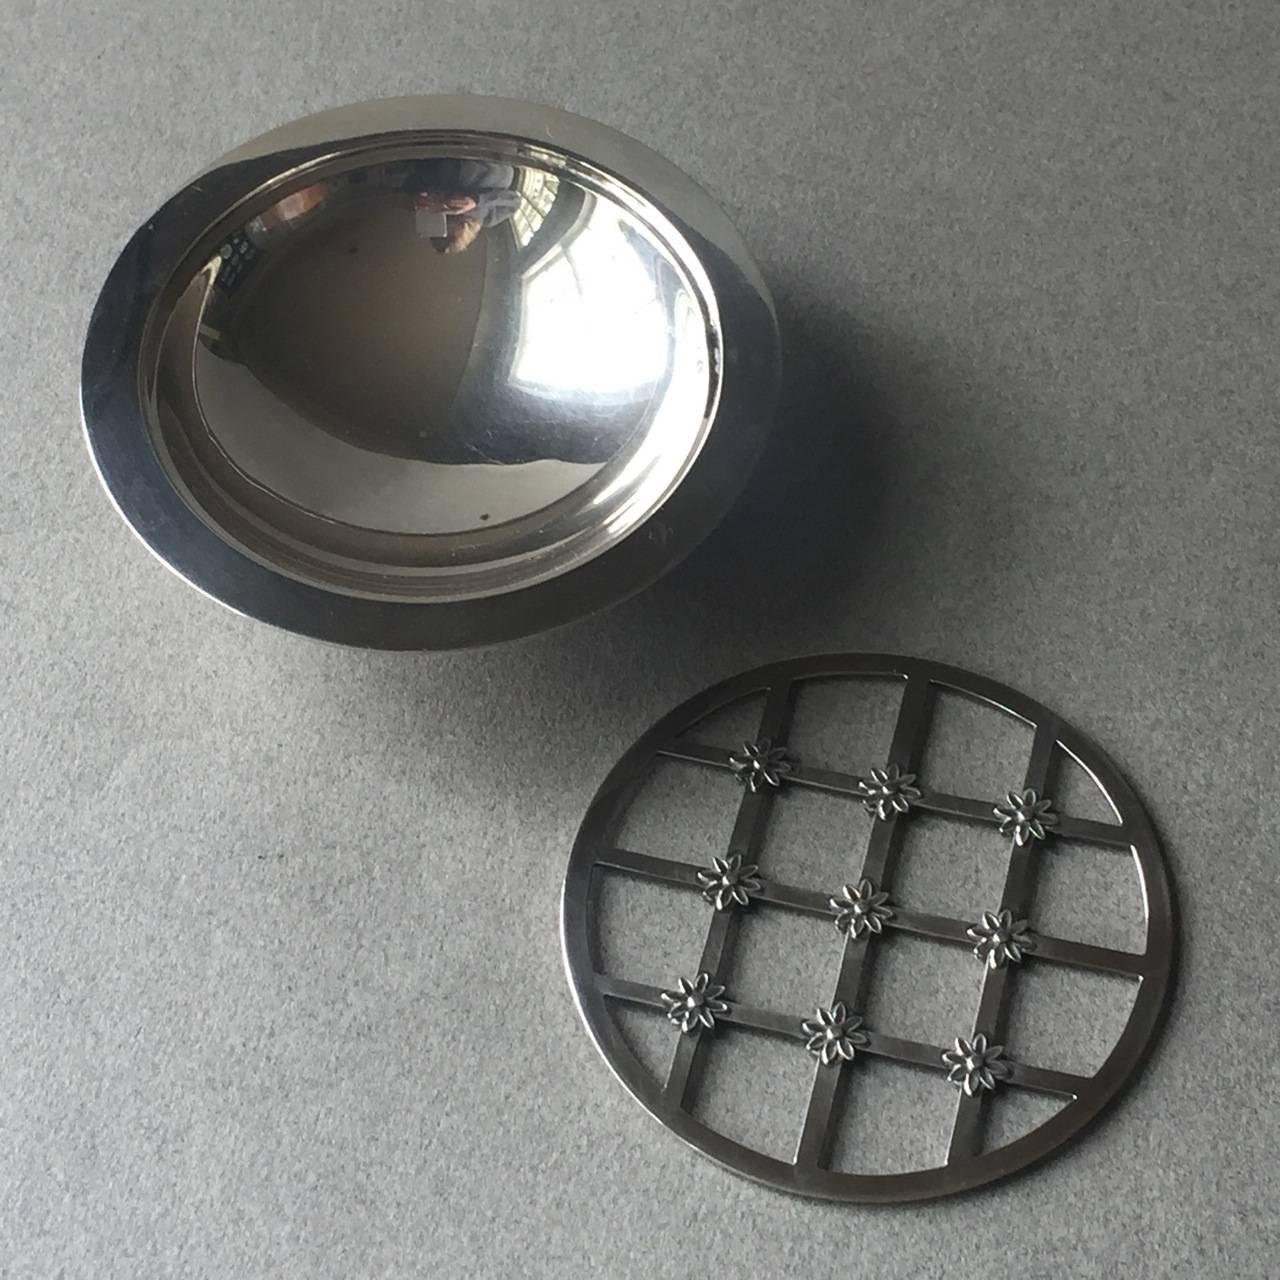 Georg Jensen sterling silver ashtray No. 816C by Sigvard Bernadotte.

A rare find. Here is an elegant ashtray with removable grid, circa 1925-1932. Excellent condition with lovely patina.

Measures: 4